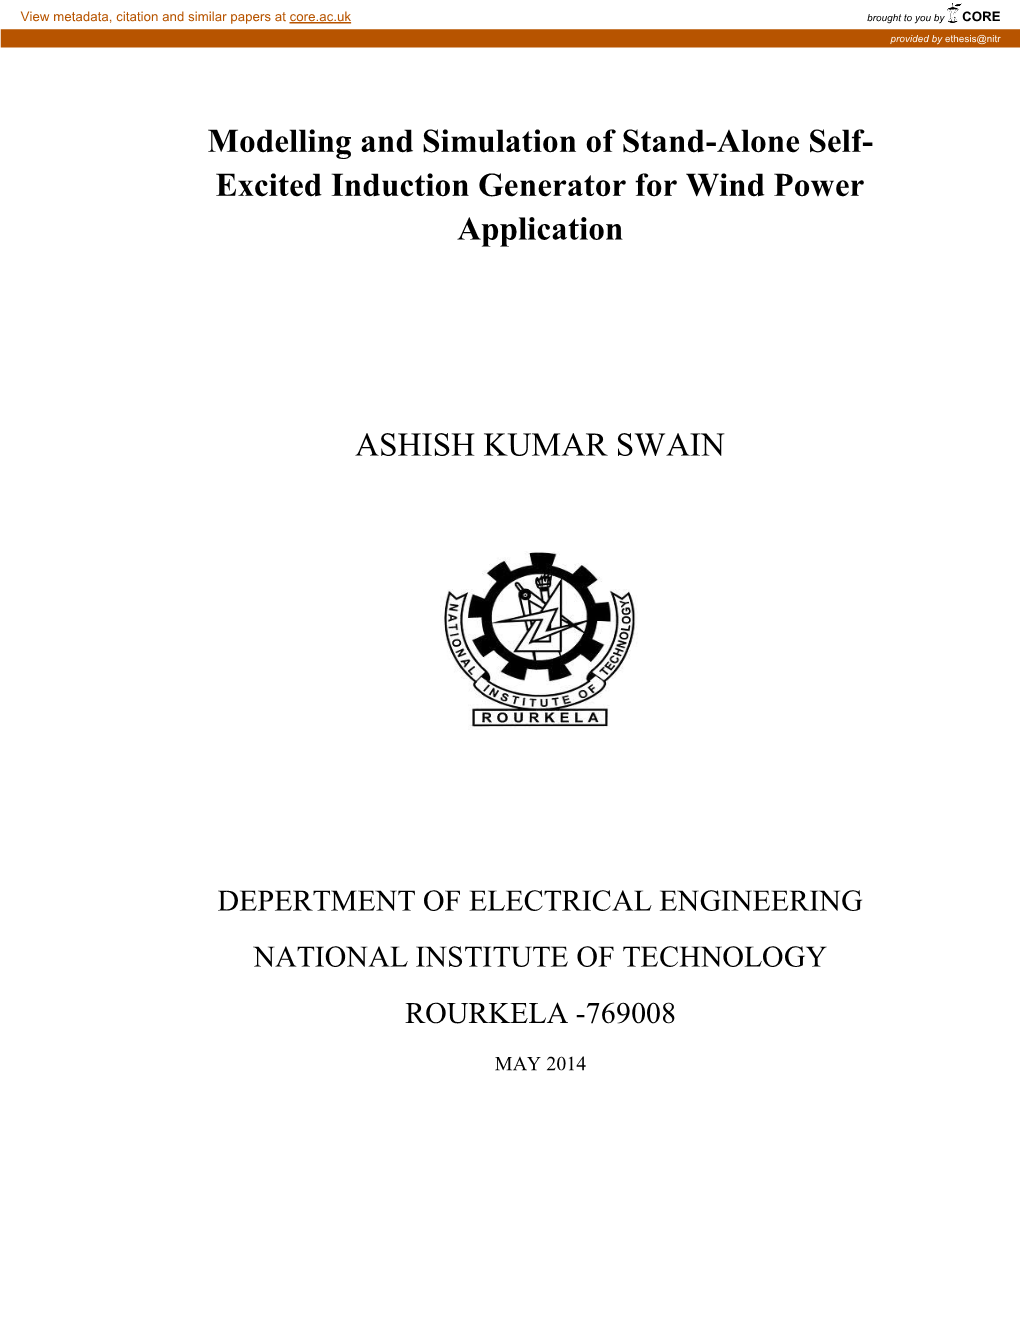 Modelling and Simulation of Stand-Alone Self- Excited Induction Generator for Wind Power Application